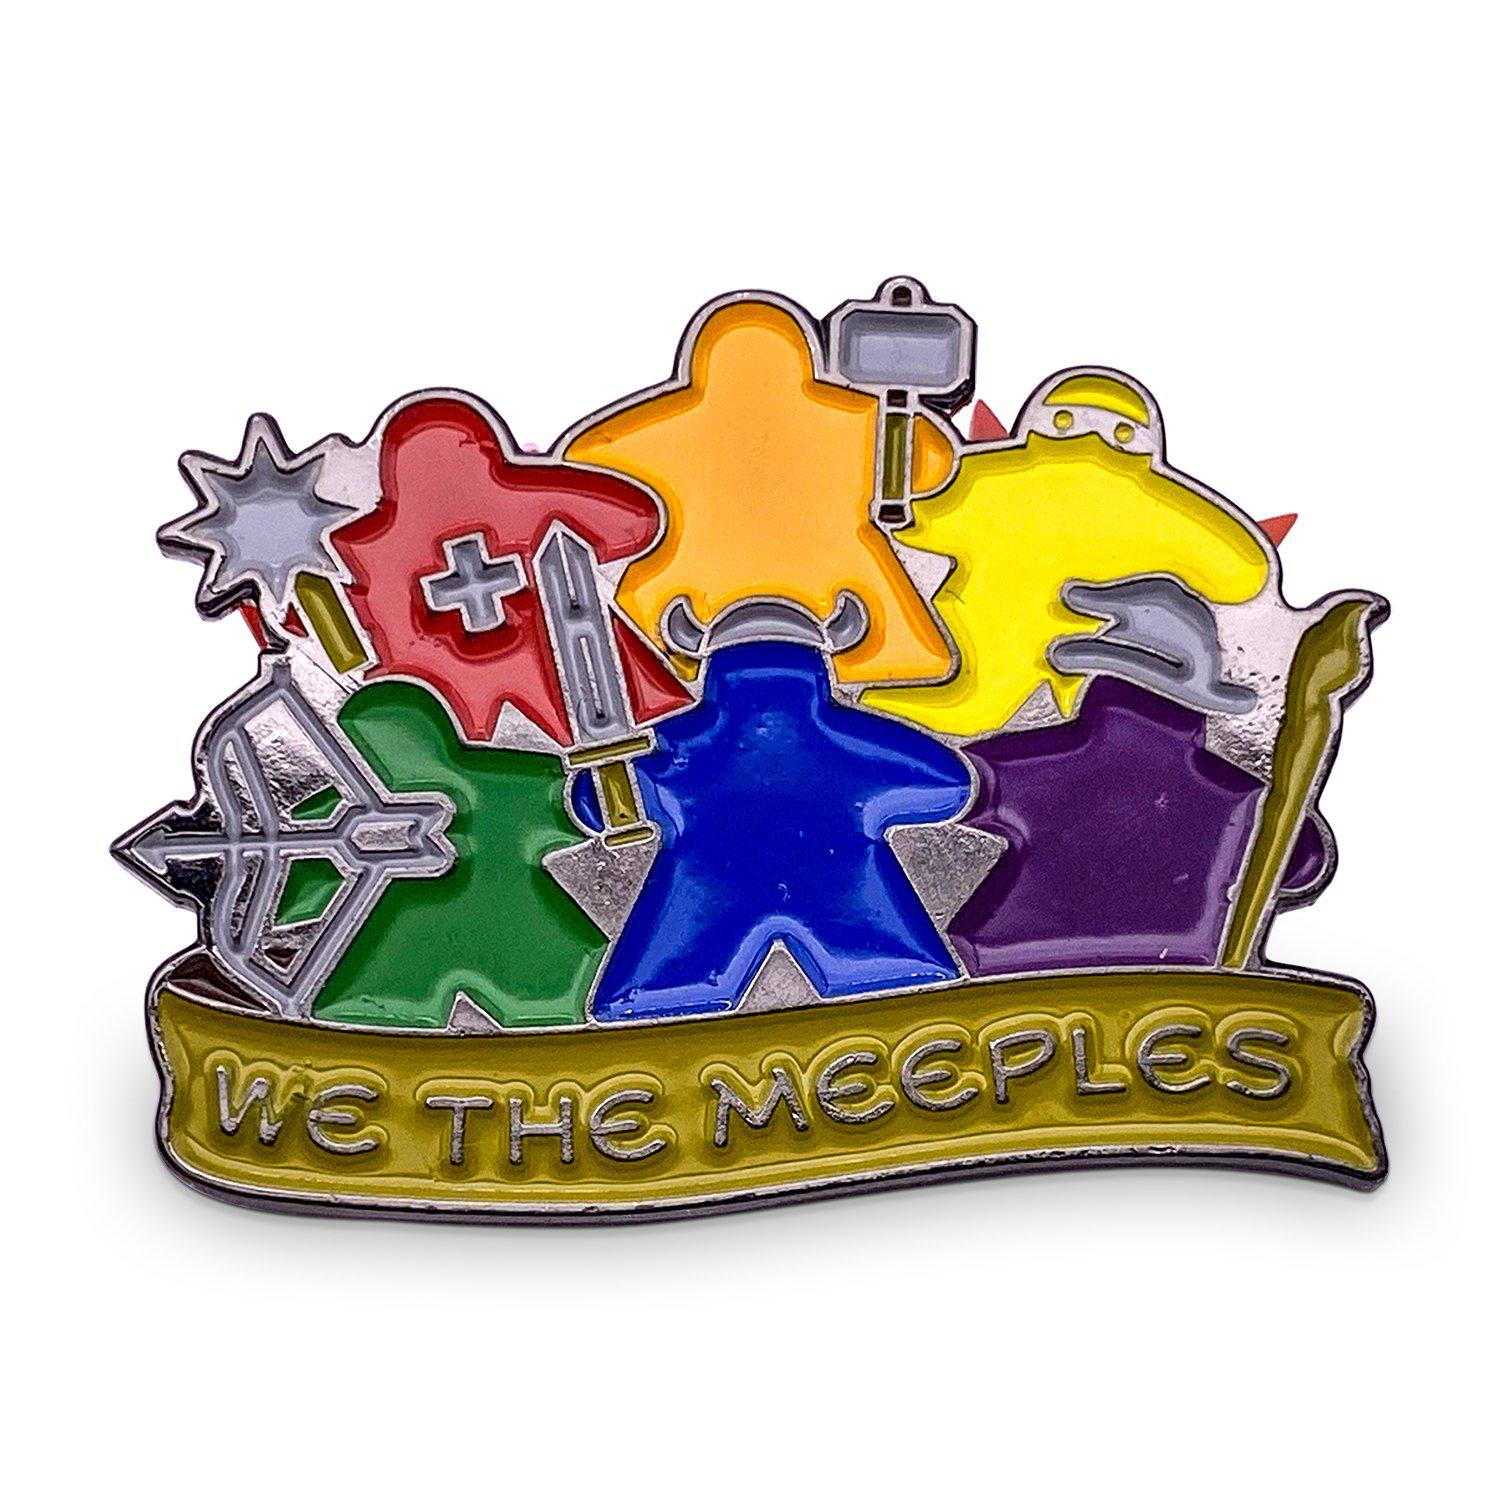 We the Meeples - Hard Enamel Adventure Pin Metal by Norse Foundry-Pins-Norse Foundry-DND Pins- Board Game Pins-Geeky Pins-RPG Pins-Dungeons and Dragons Pins